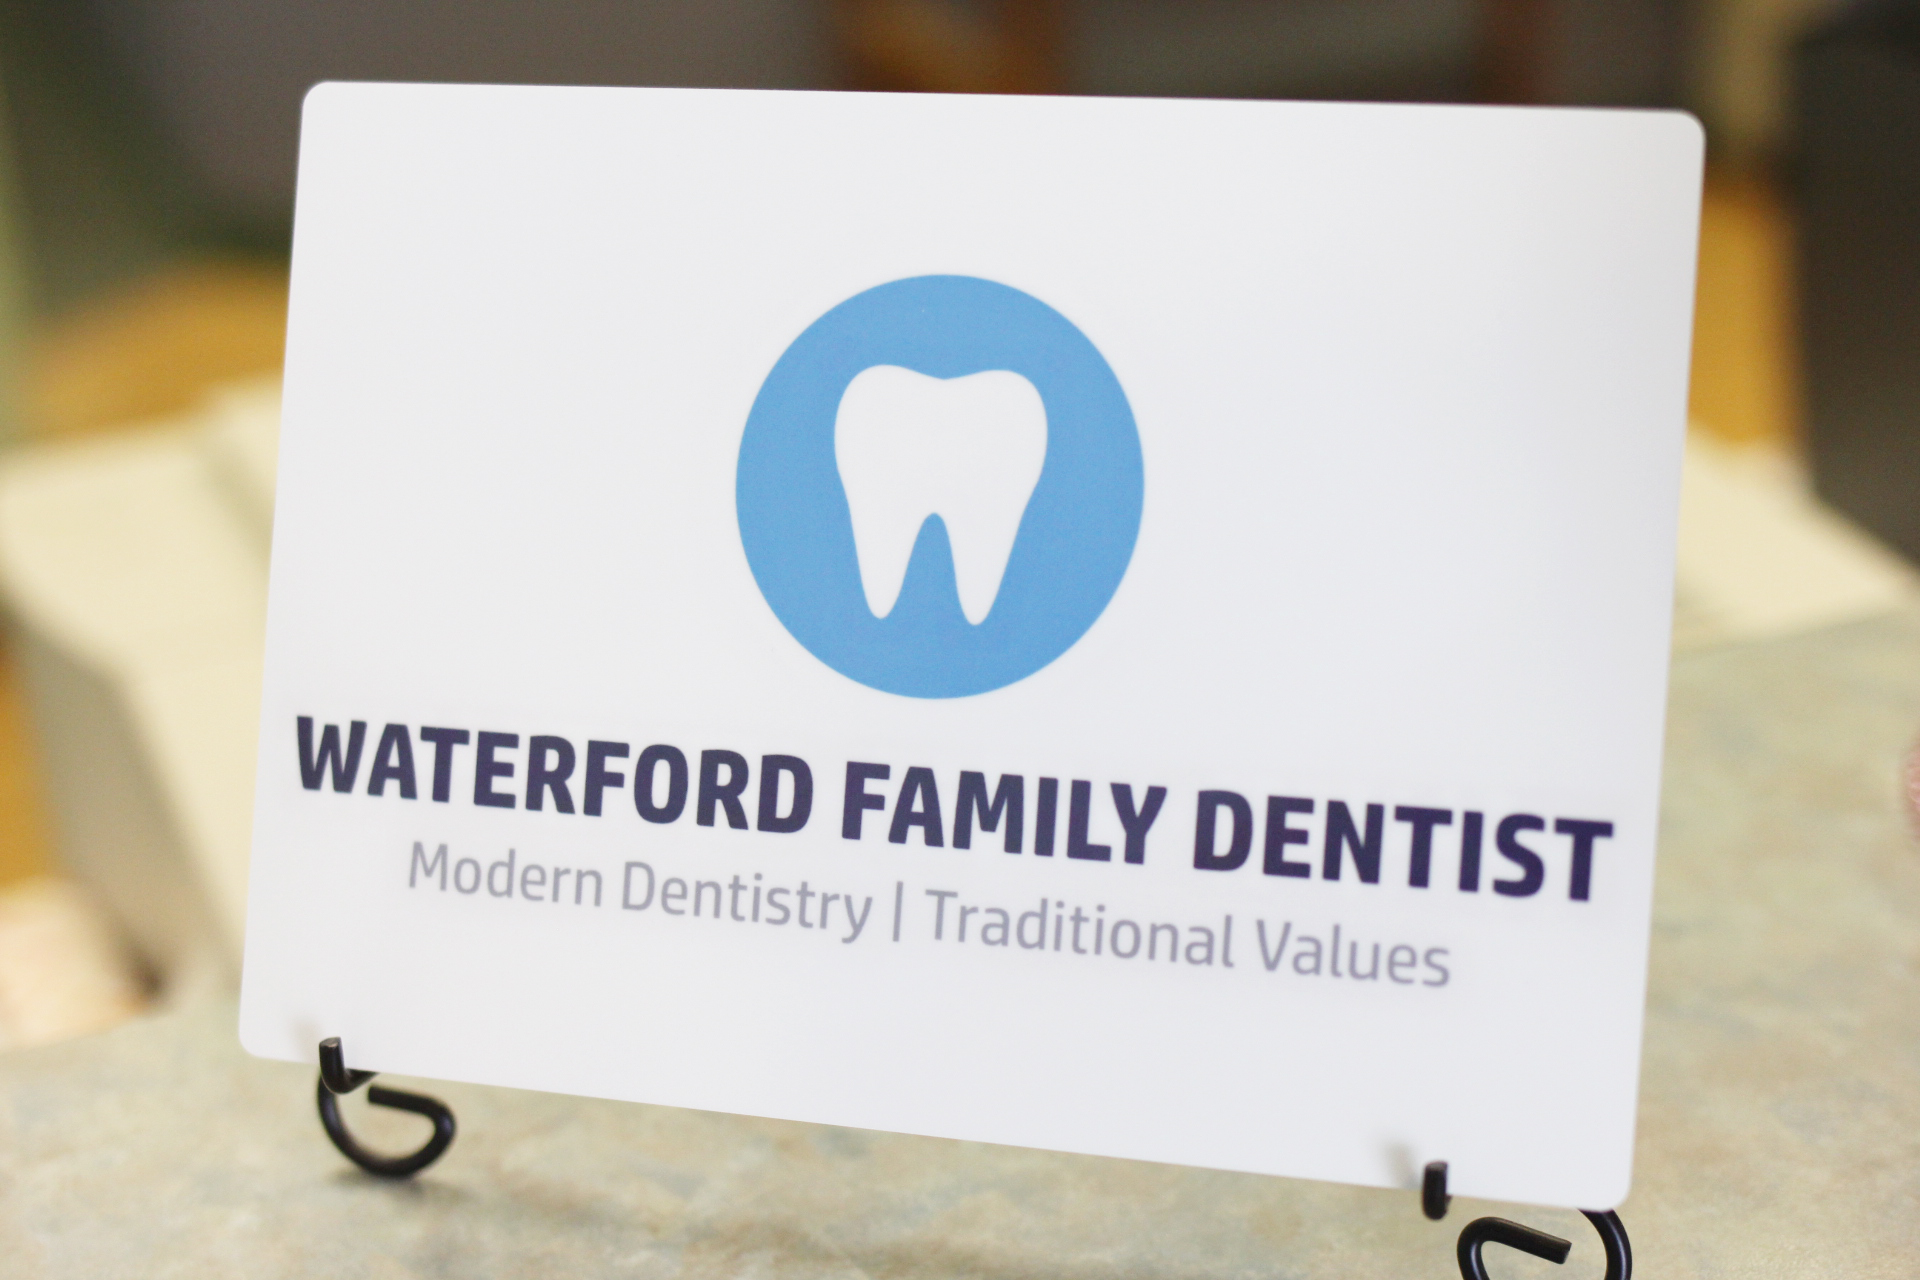 Waterford Family Dentist